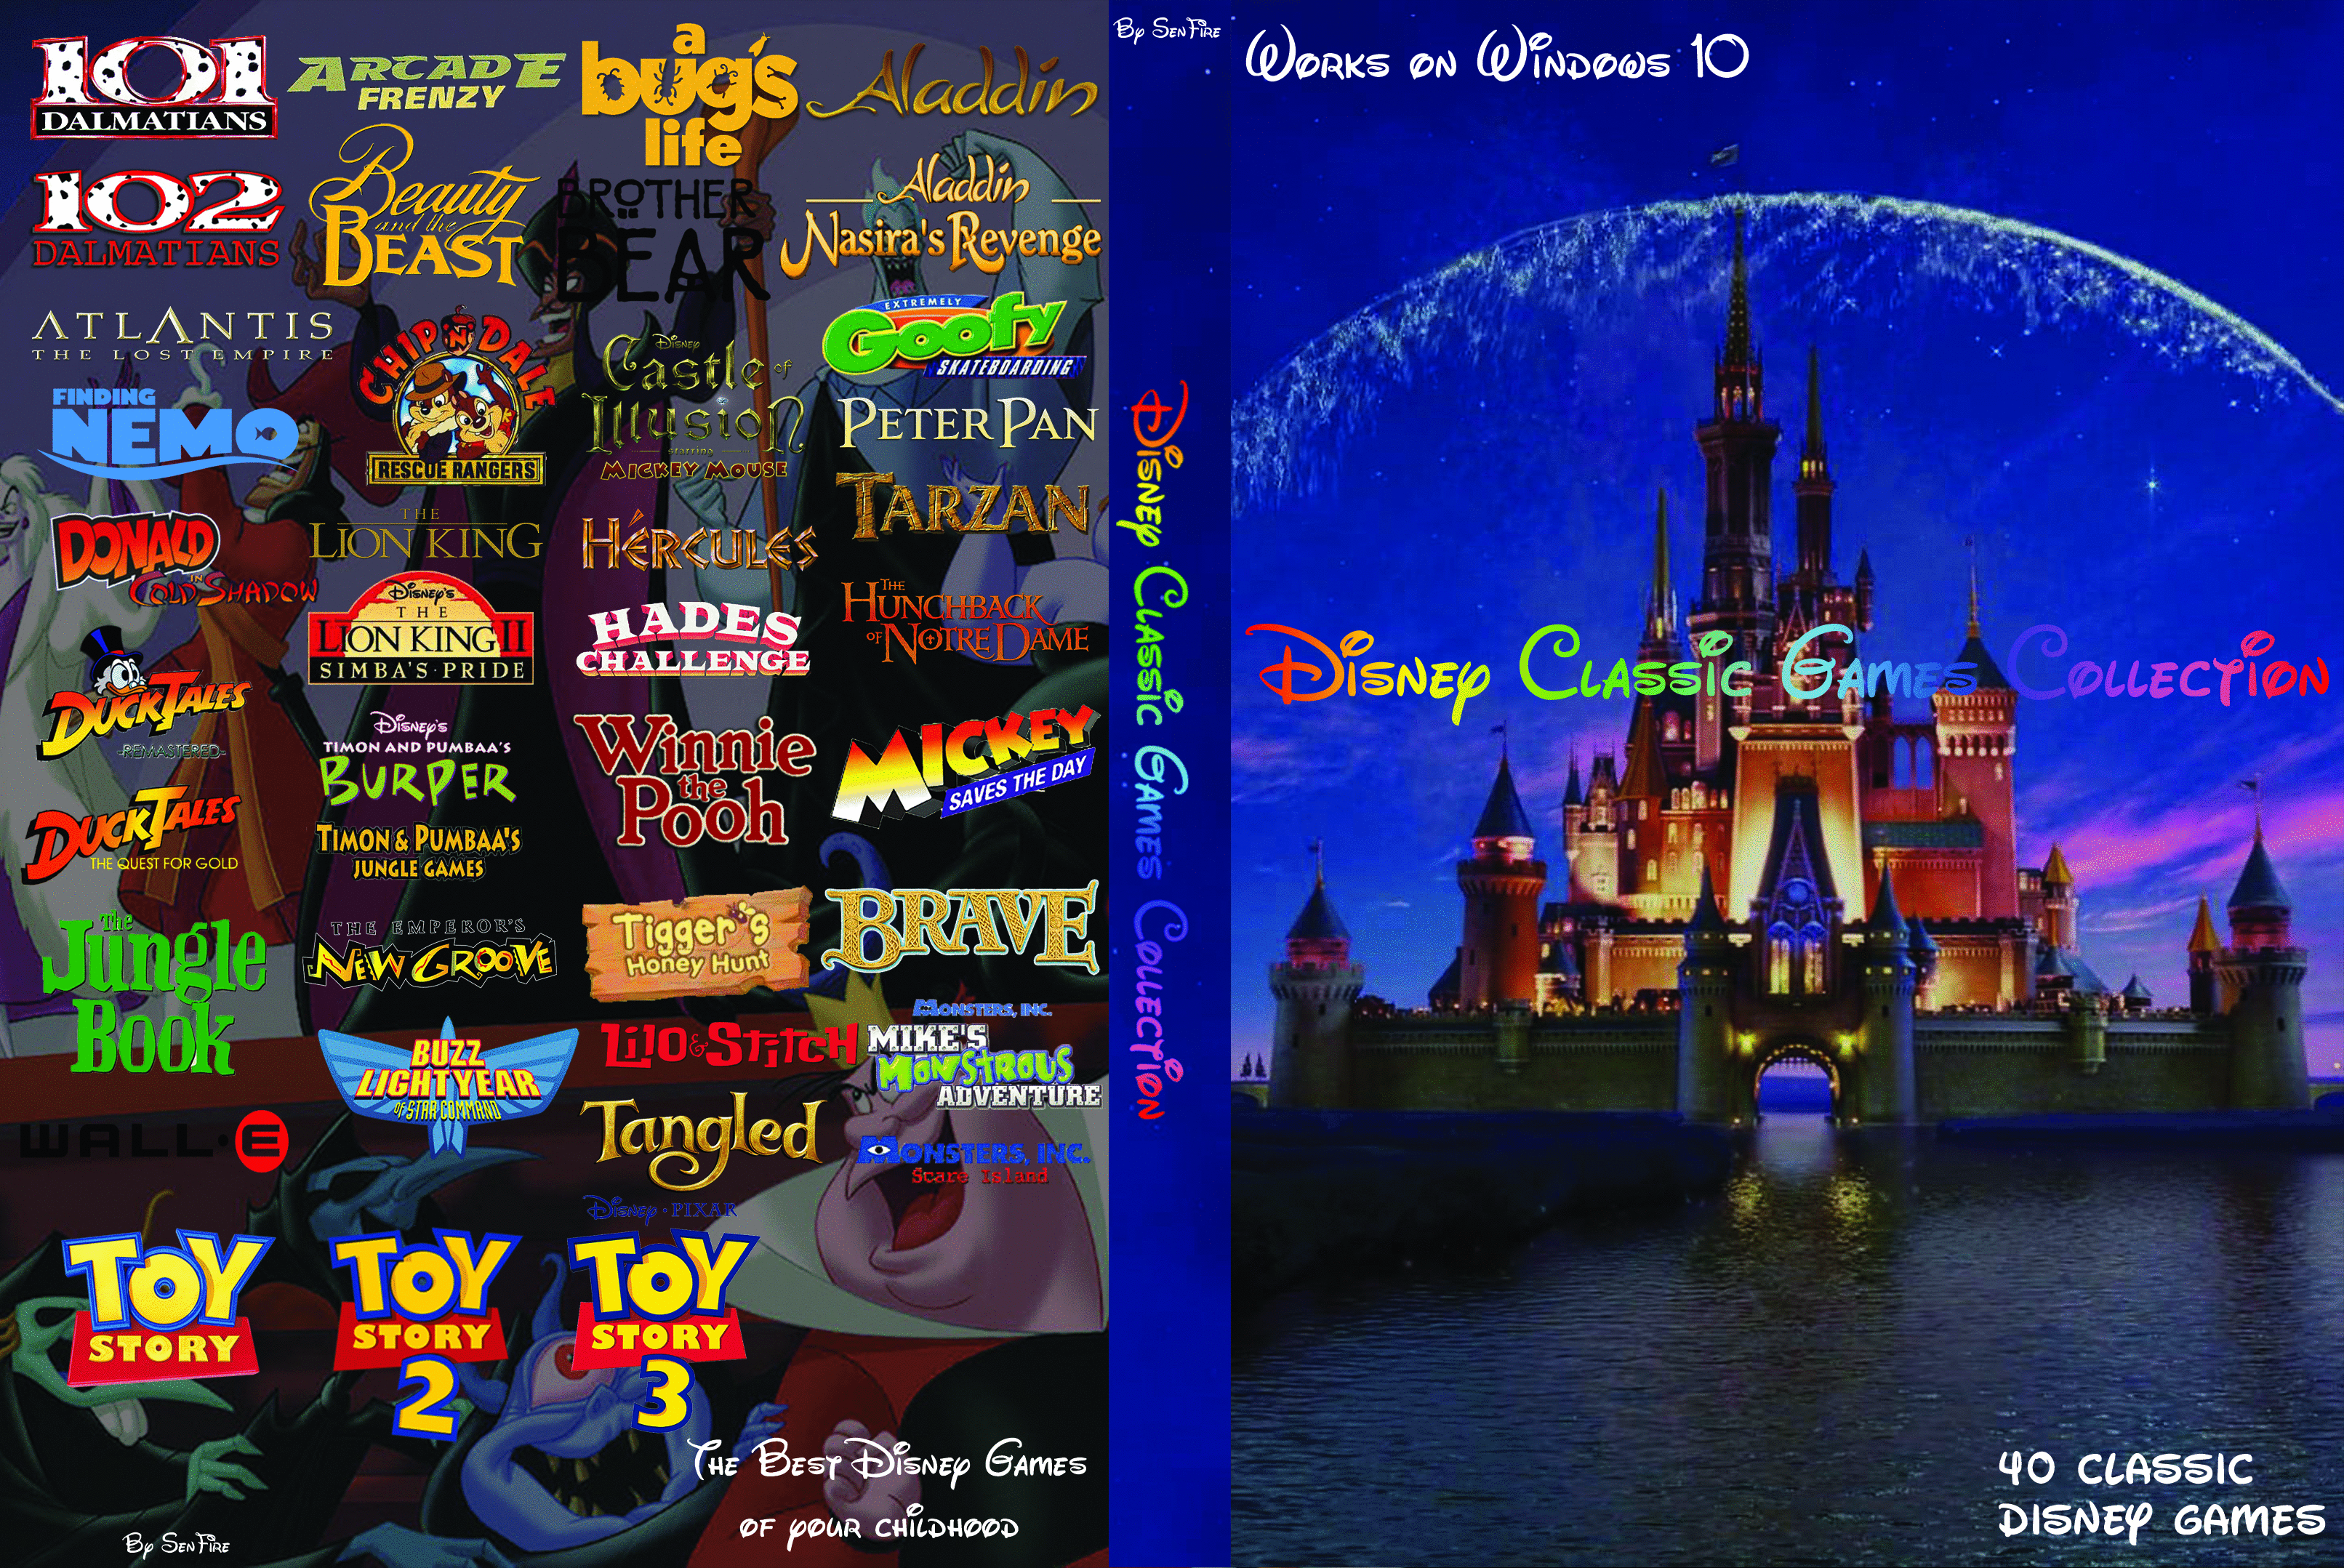 Classic games collection. Disney Classic games collection. Disney Classics collection. Коллекция игр Дисней. Disney Classics collection PS.